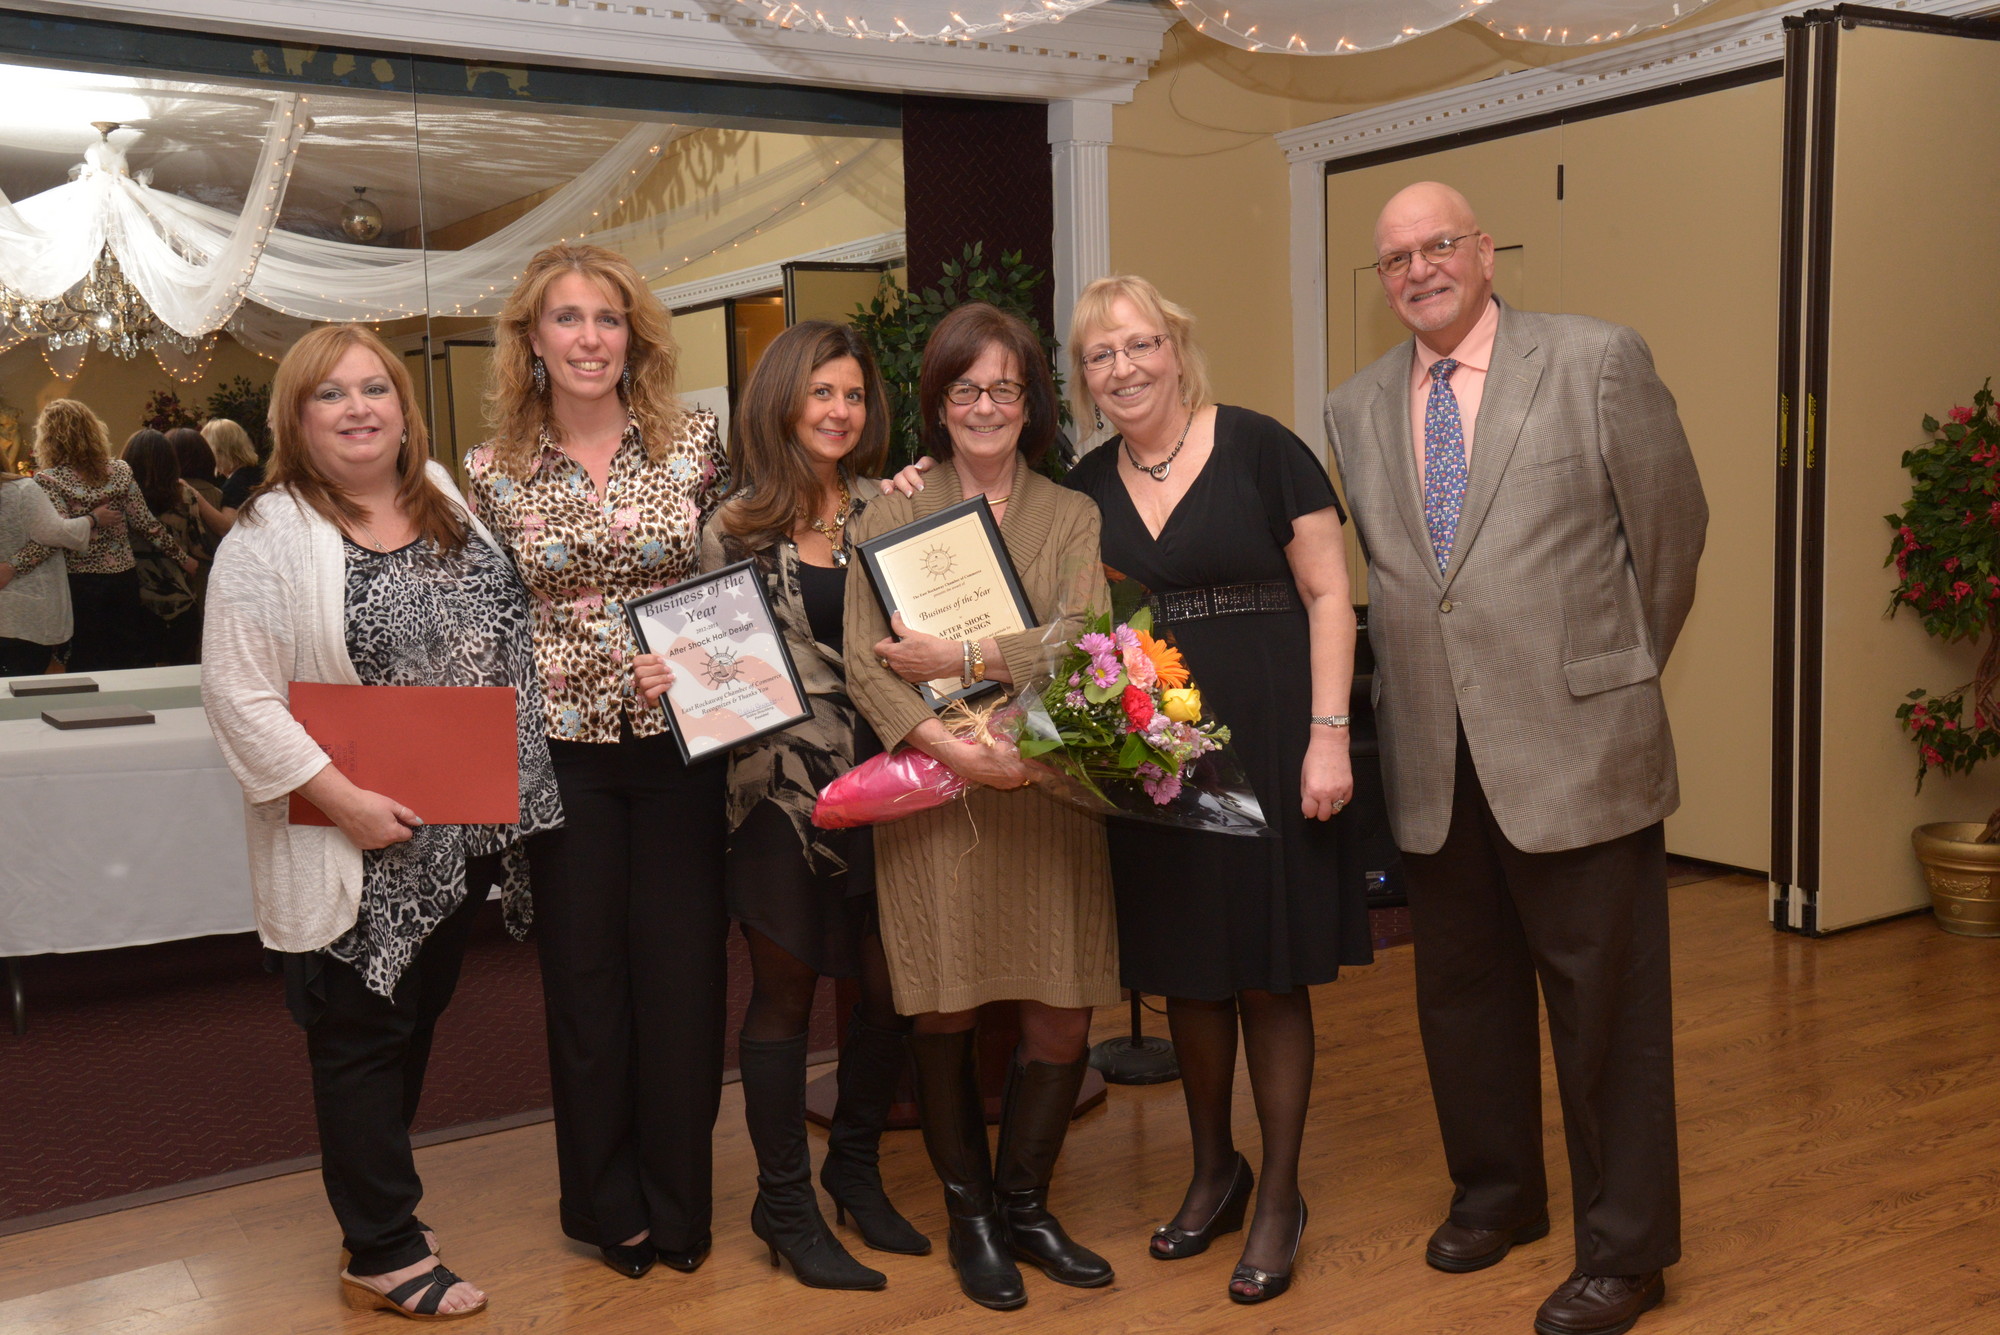 after Shock hair design was one of two Businesses of the Year. Pictured from left were Rose Anne Strife, Gilda Briguglio, Kathy DeAngelis, Nancy Duka, Chamber President Debbie Hirschberg, and the Chamber’s Public Relations Specialist Charlie D’Agostino.